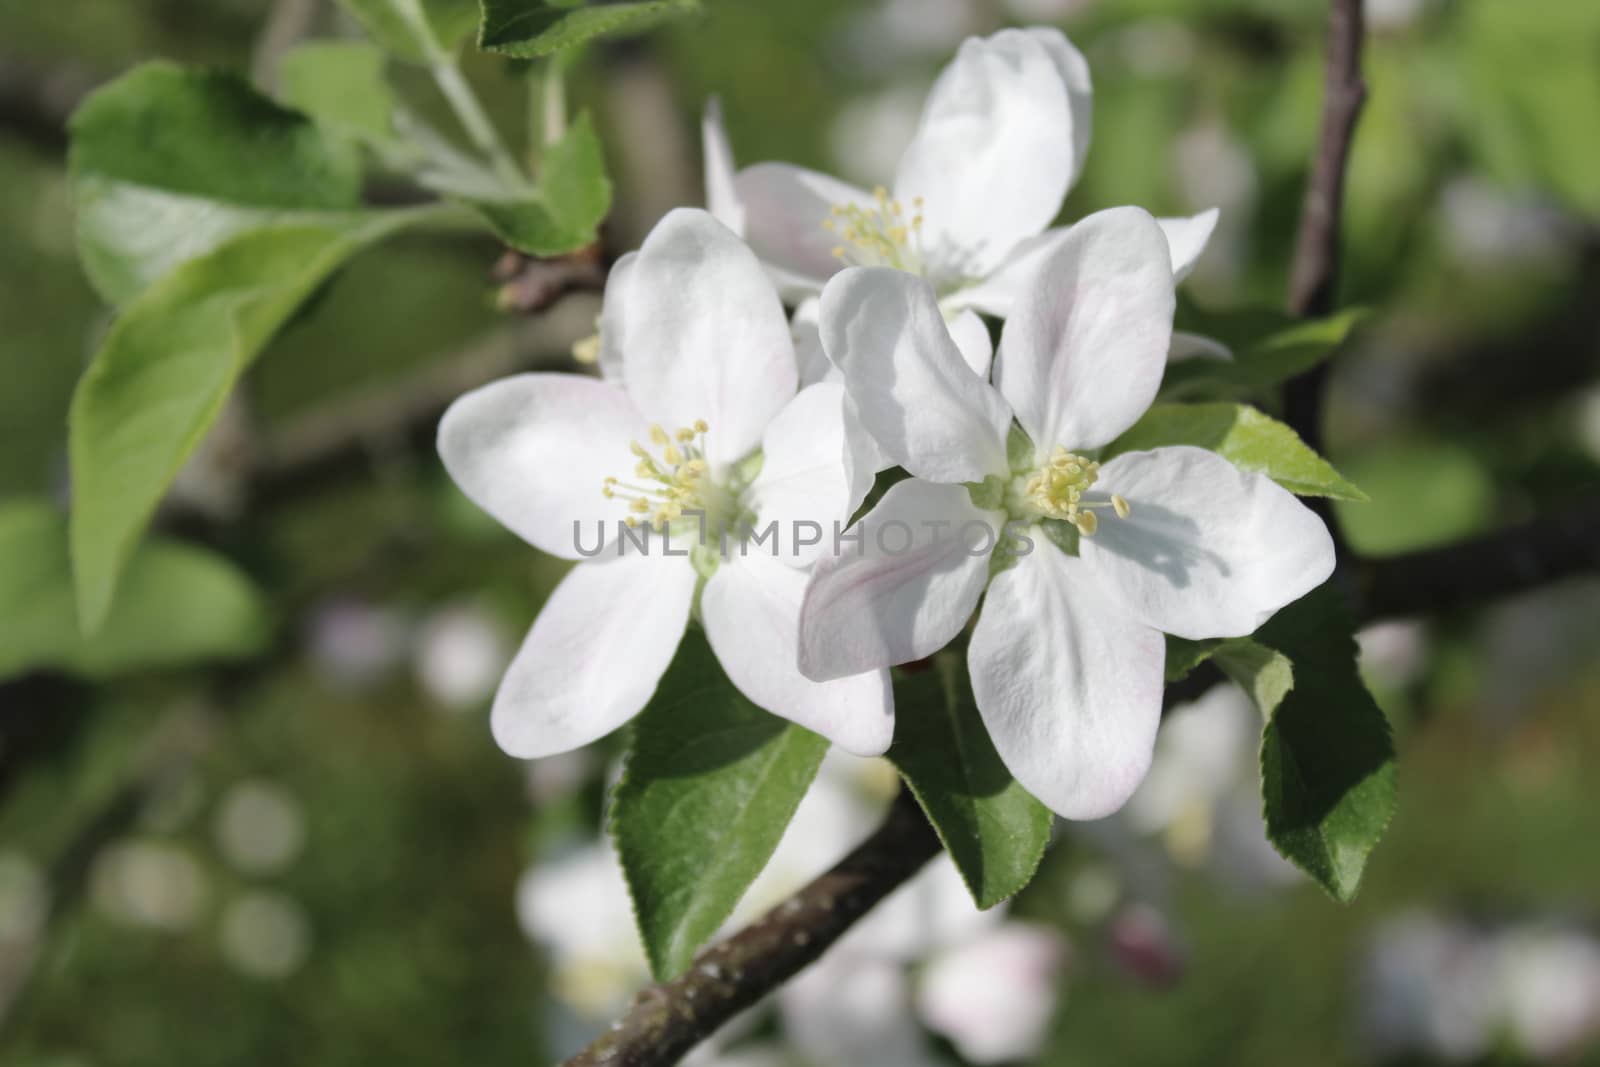 The picture shows a wonderful apple tree blossoms.